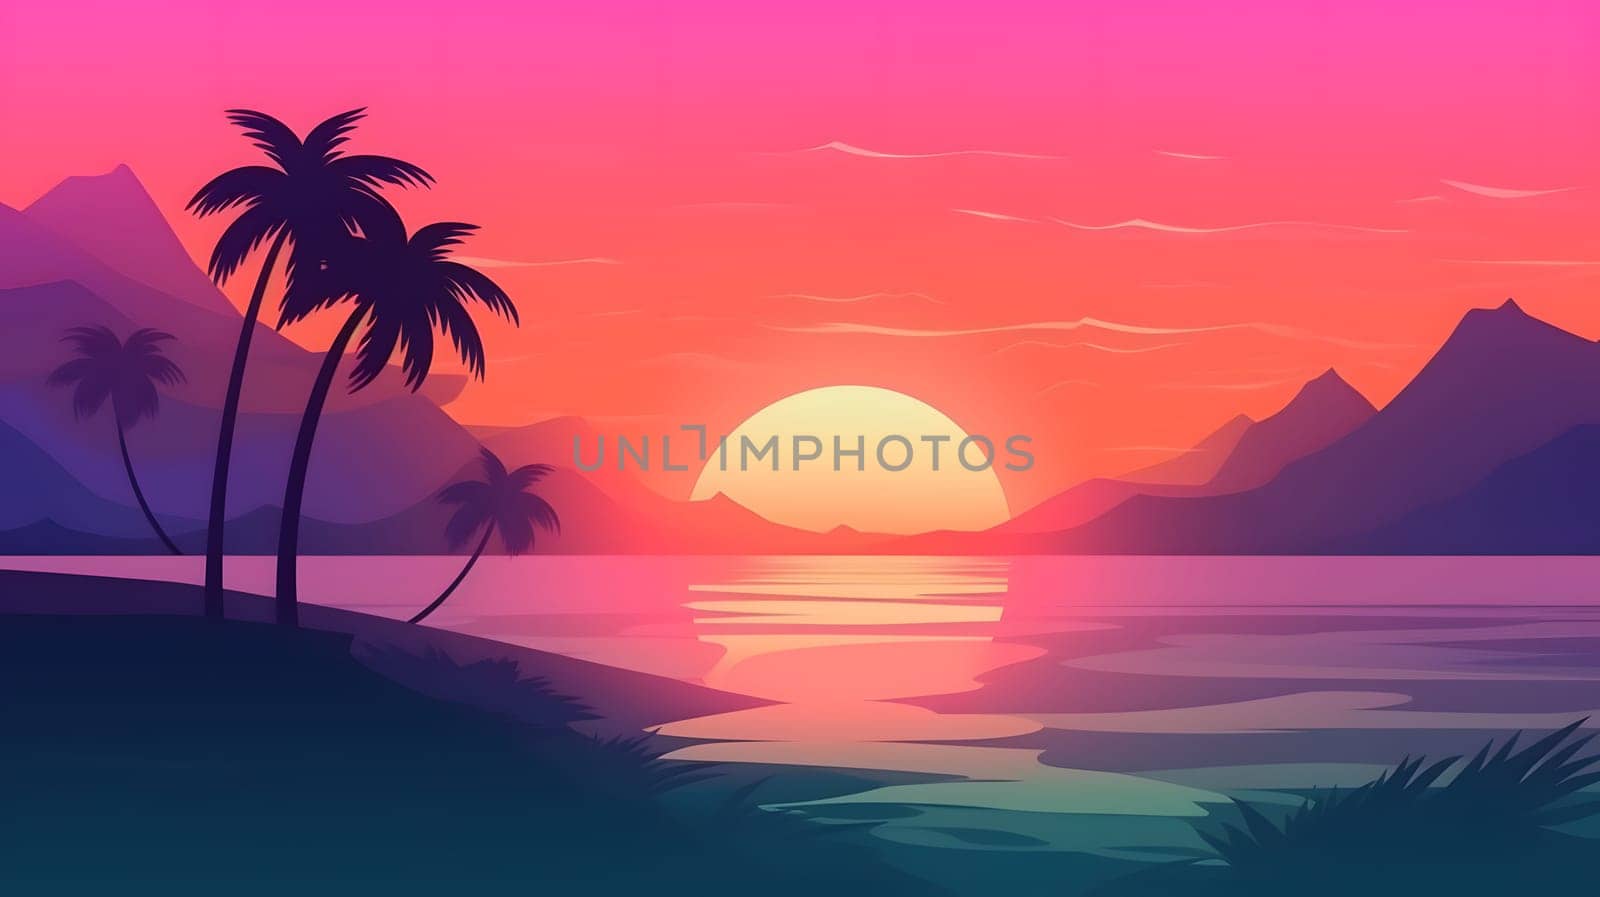 generic low-fi synthvawe gradient sunset landscape in neon colors, neural network generated image by z1b